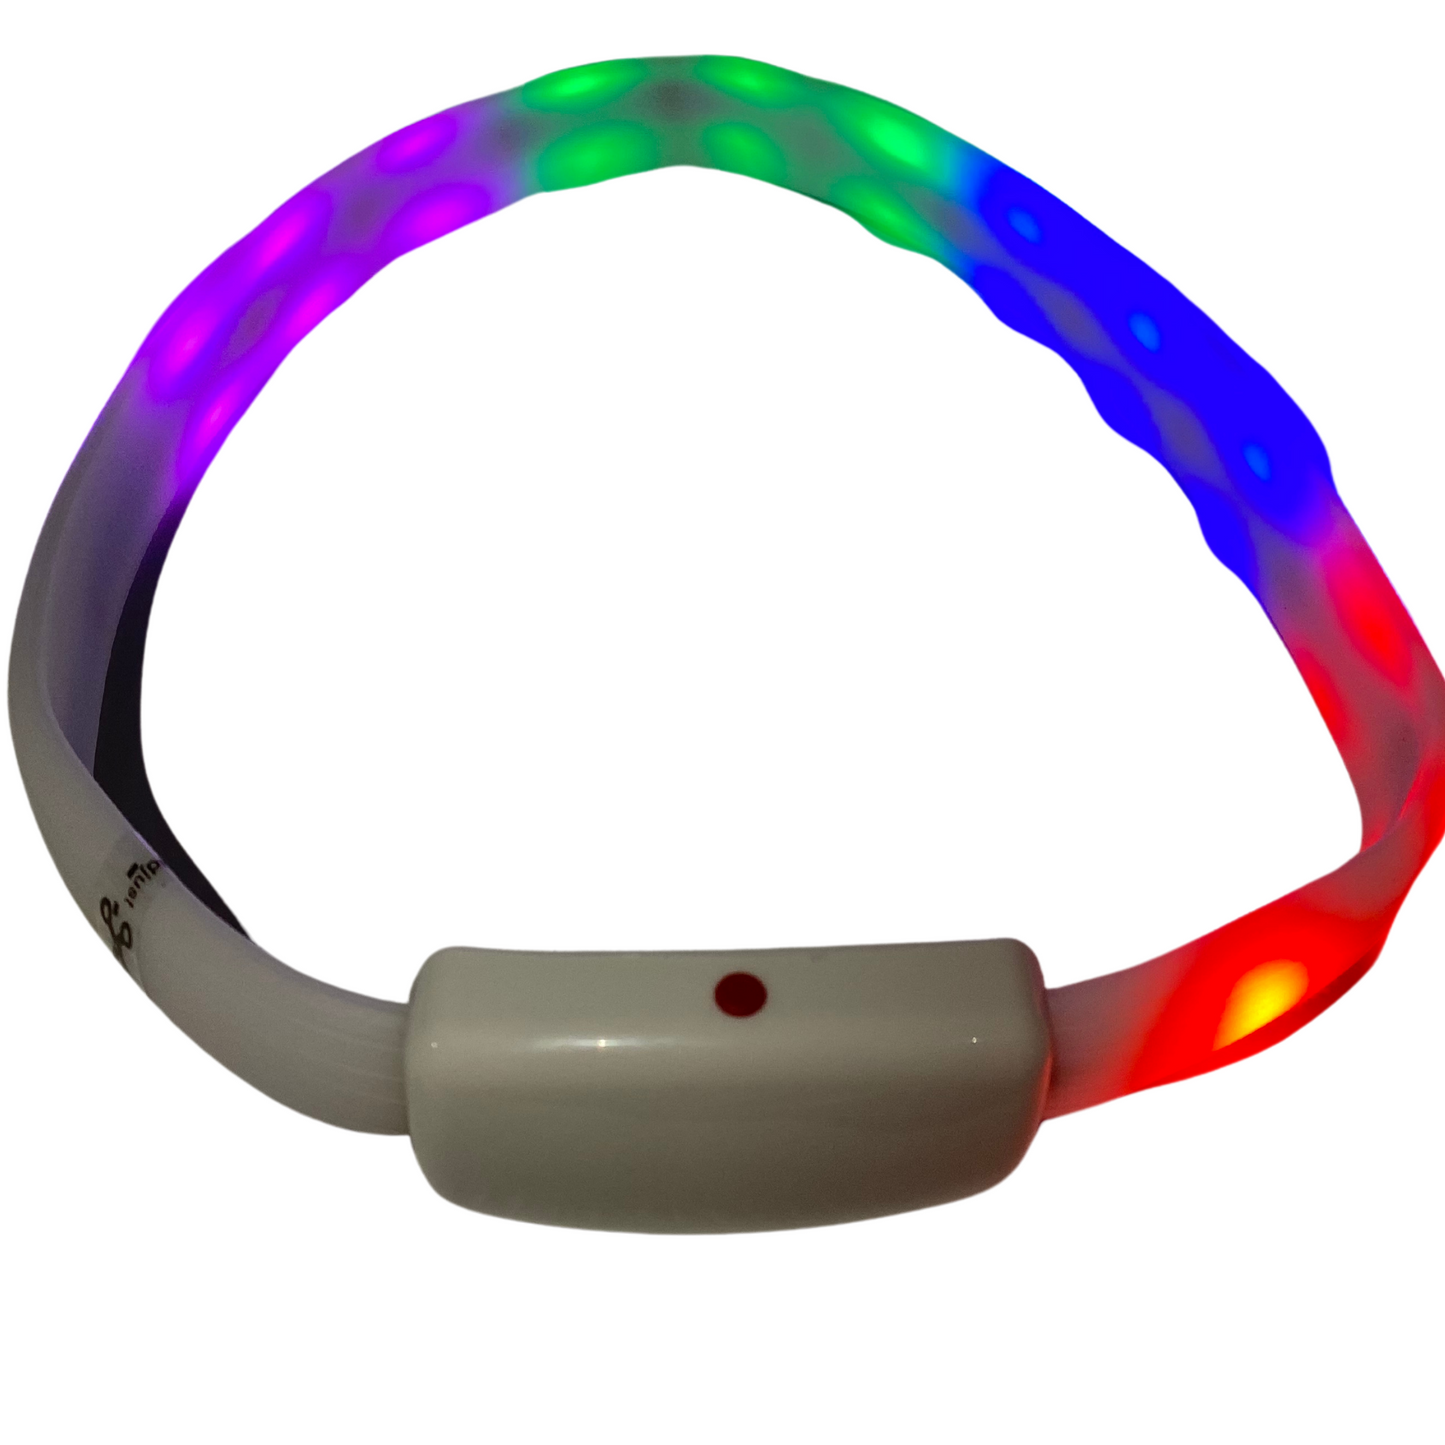 LED Night Collar | Dogs | 5 Colours Adjustable & Rechargeable